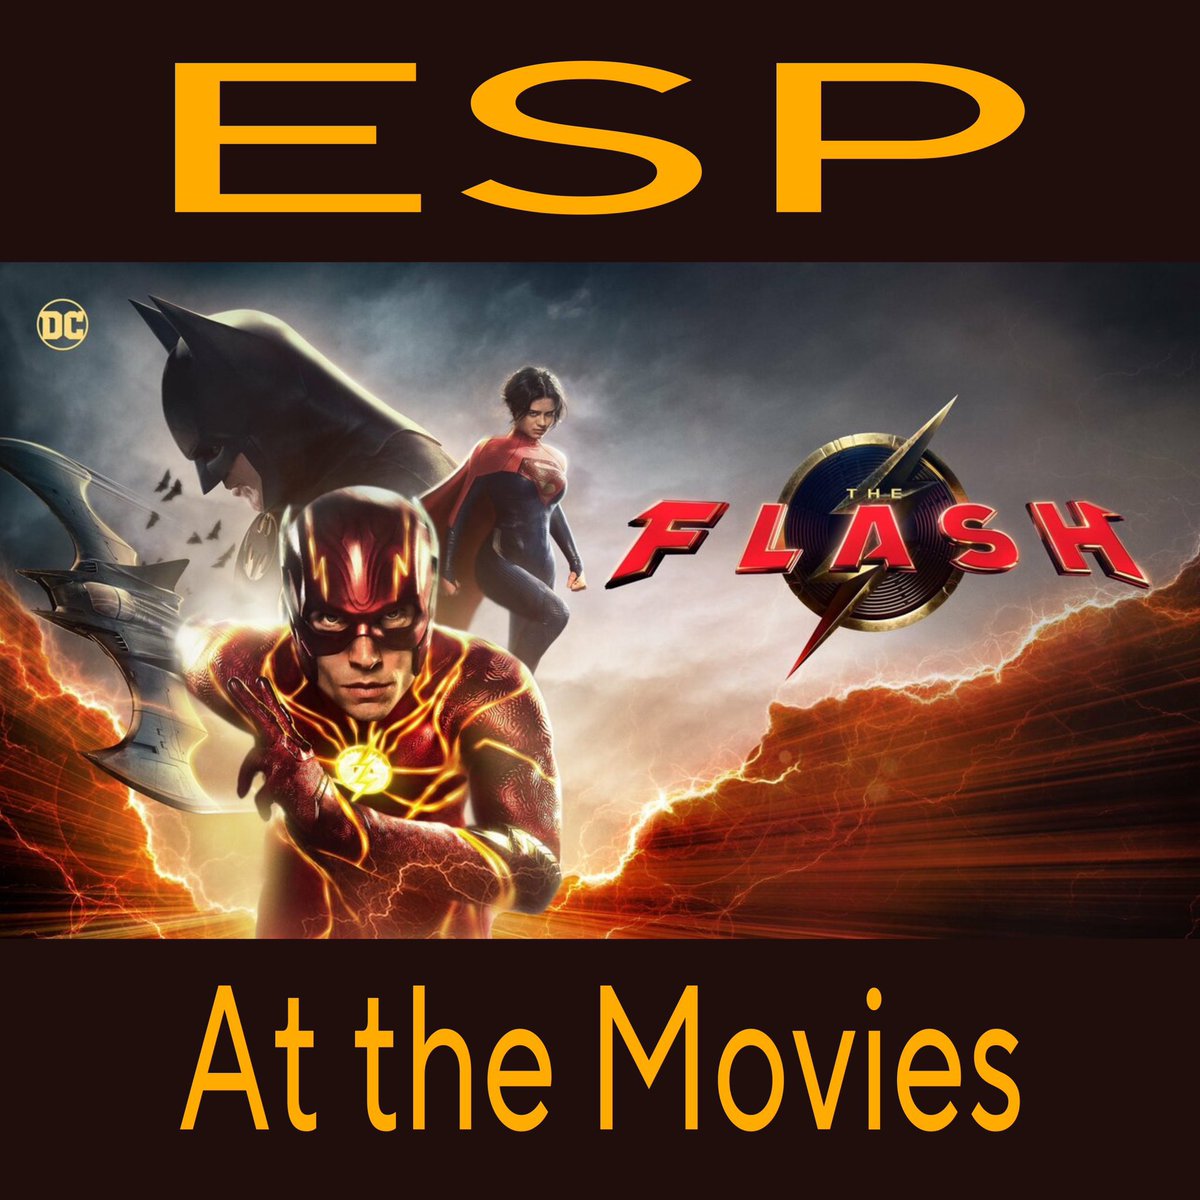 ESP At The Movies: The Flash (2023) Is Now Available At podbean.com/pu/pbblog-p3n5…. #SK8ERNezPodcastNetwork #ESociety #ESP #ESPAtTheMovies #Movies #Entertainment #PopCulture #Podcast #Podcasting #PodLife #PodernFamily #PodcastHQ #PodNation #TheFlash #Batman #Supergirl #DC #DCU